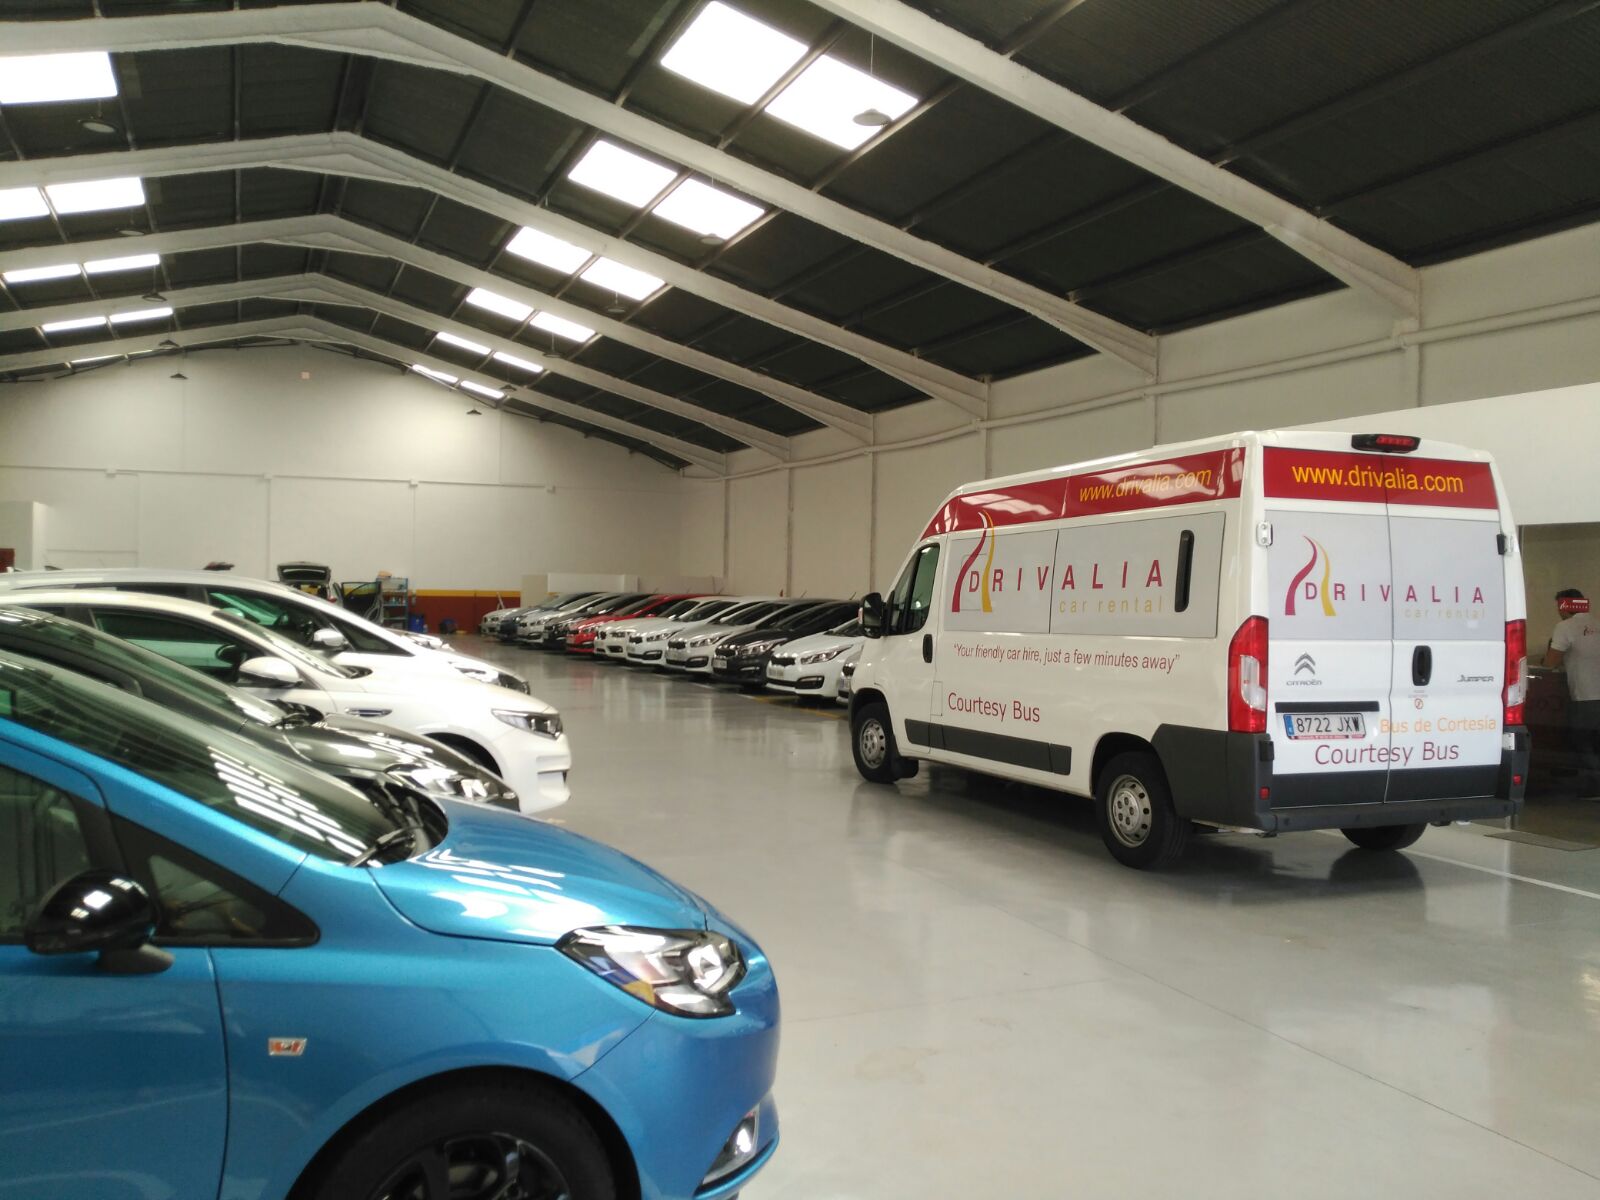 Drivalia´s new completely indoor car hire facility at Valencia airport